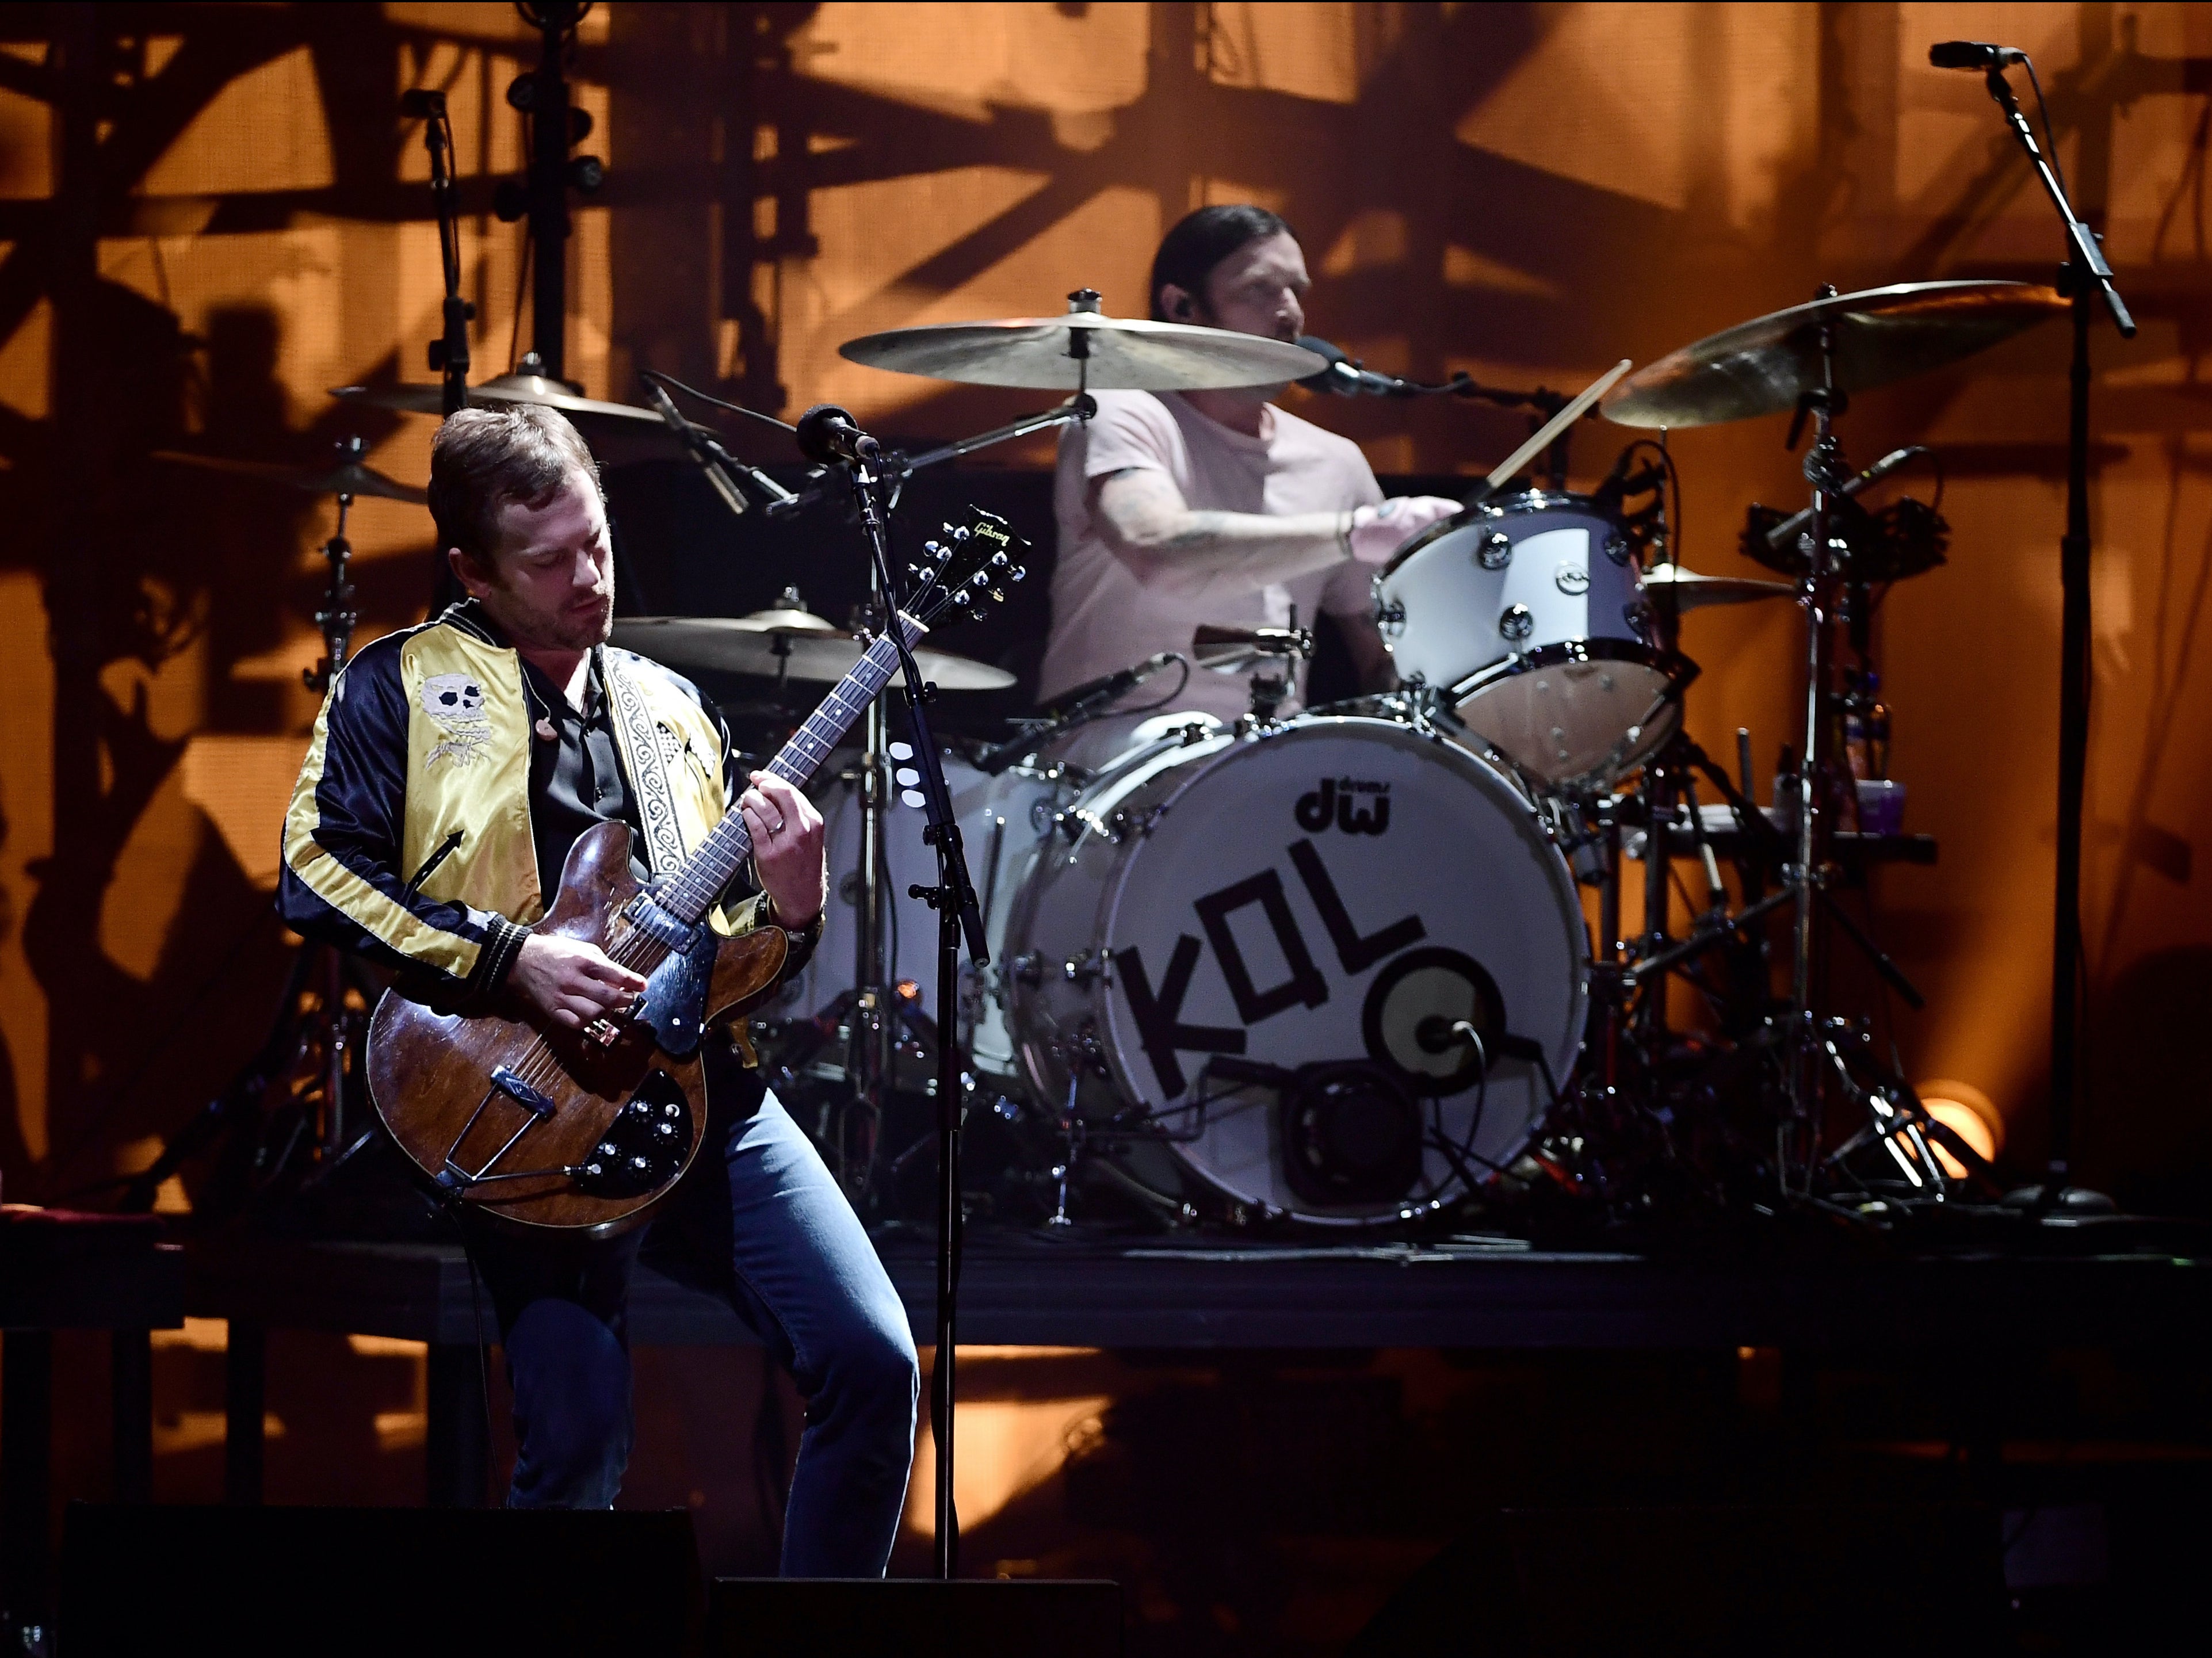 Kings of Leon performing at the MTV Europe Awards in 2016